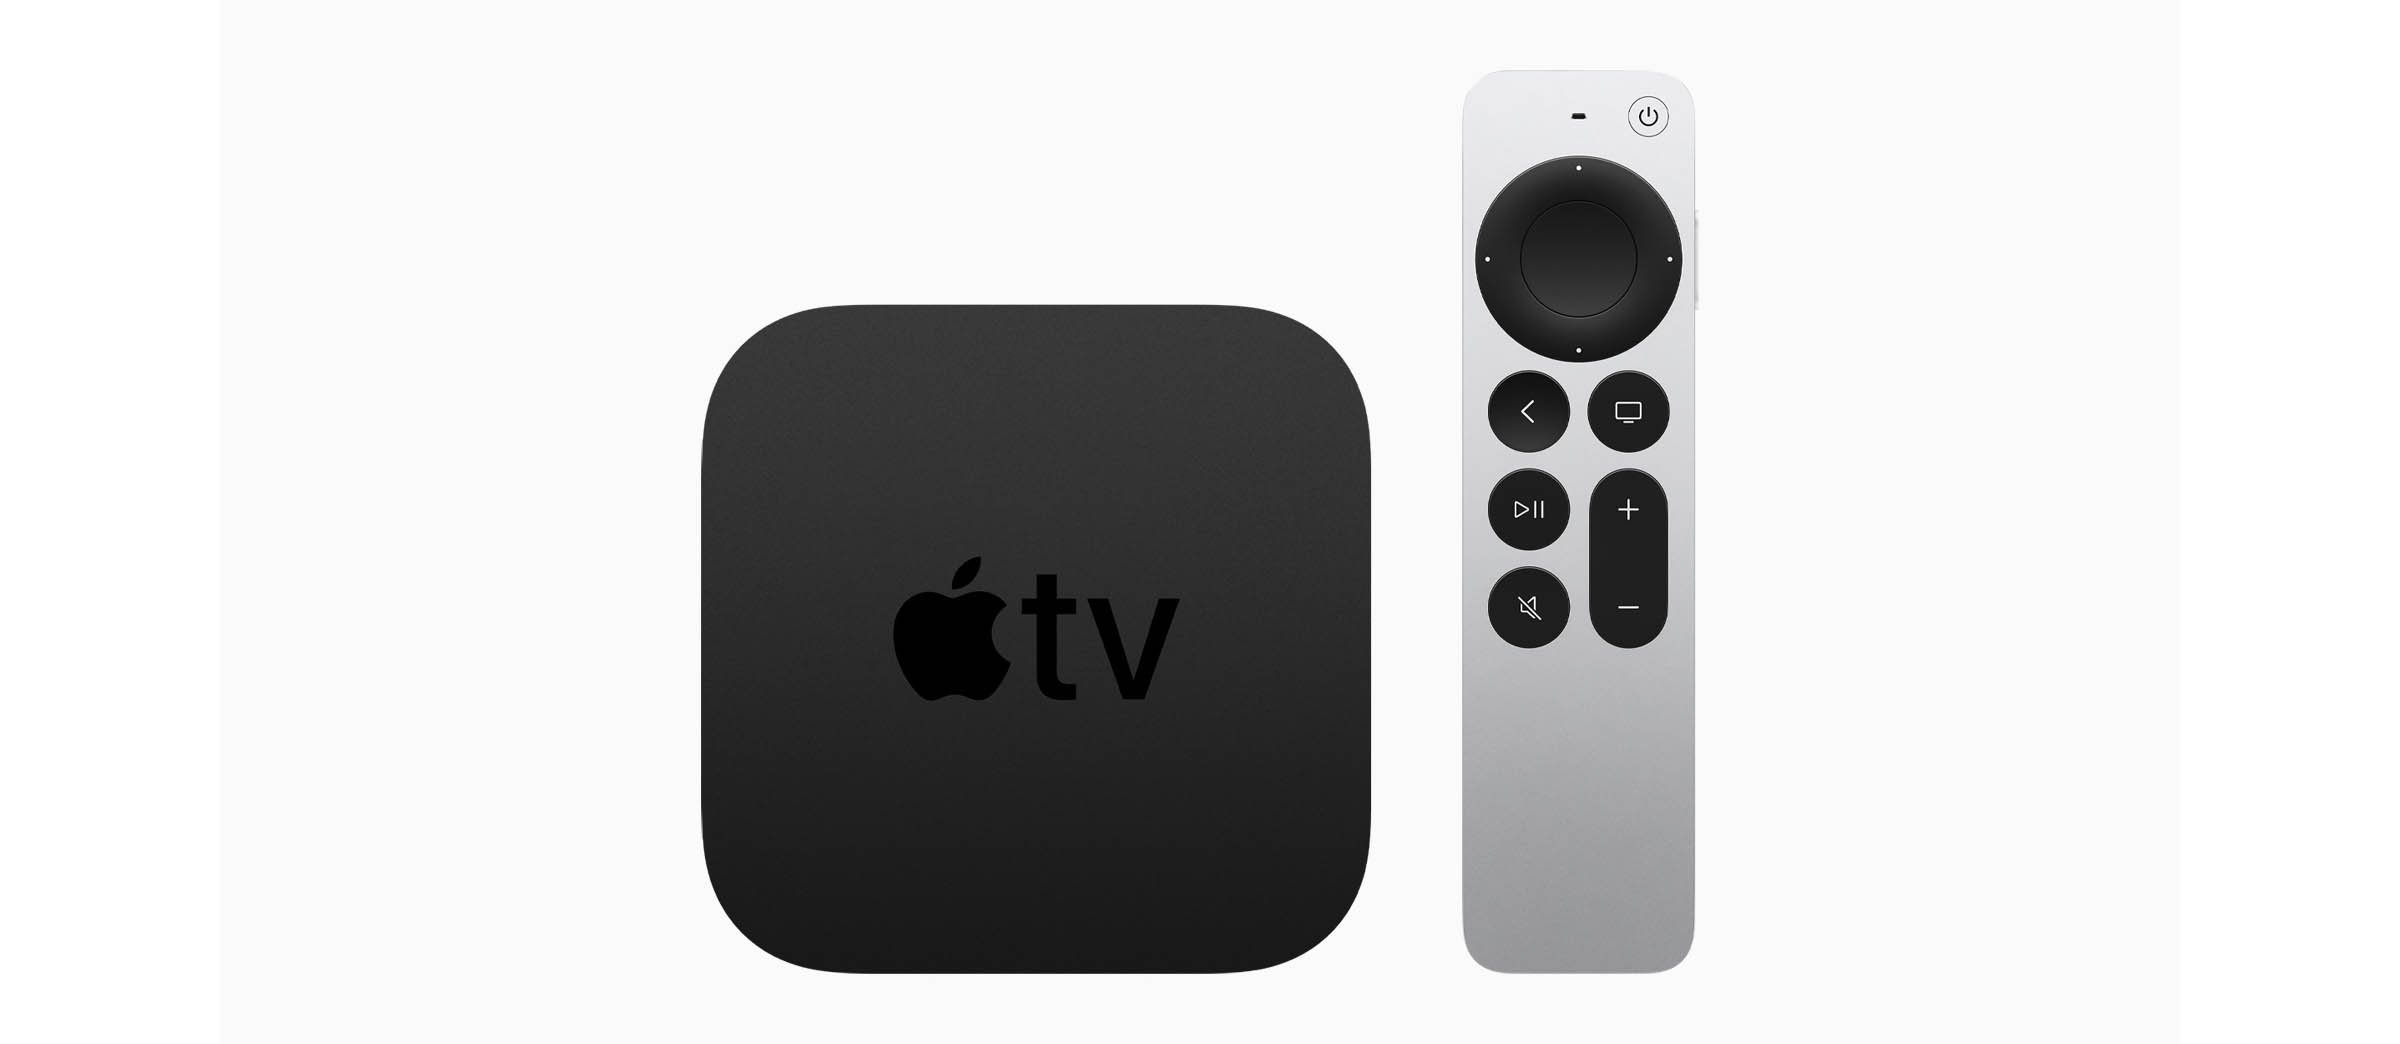 After Months of Rumors, the Next-Gen Apple TV 4K is Finally Official, Packing New Siri Remote